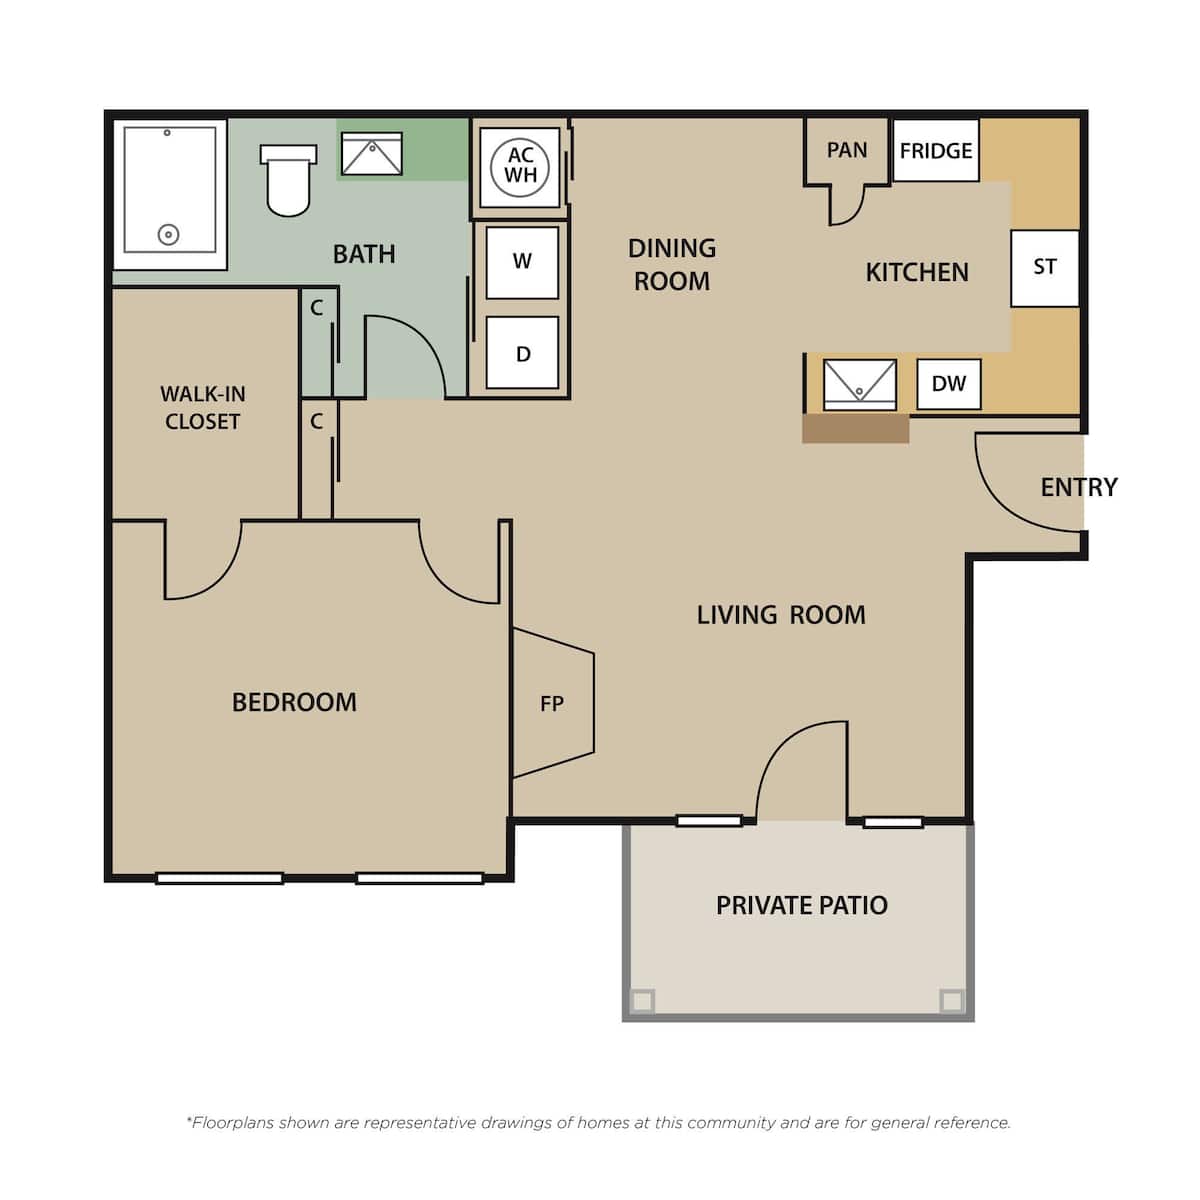 Floorplan diagram for SQUARE A5, showing 1 bedroom